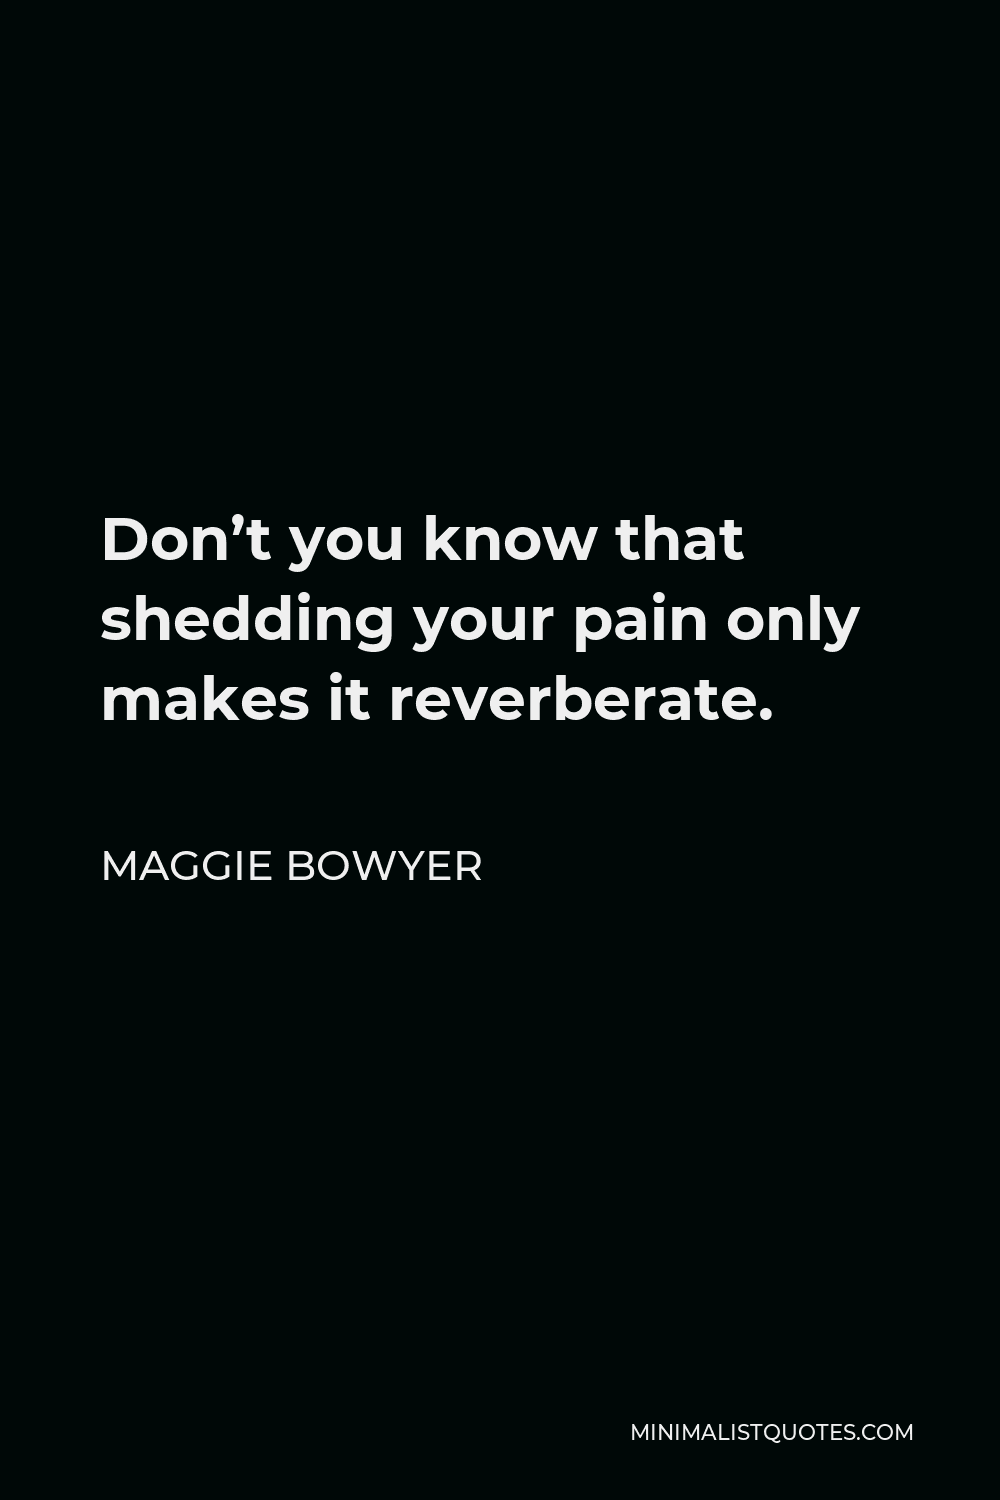 Maggie Bowyer Quote - Don’t you know that shedding your pain only makes it reverberate.